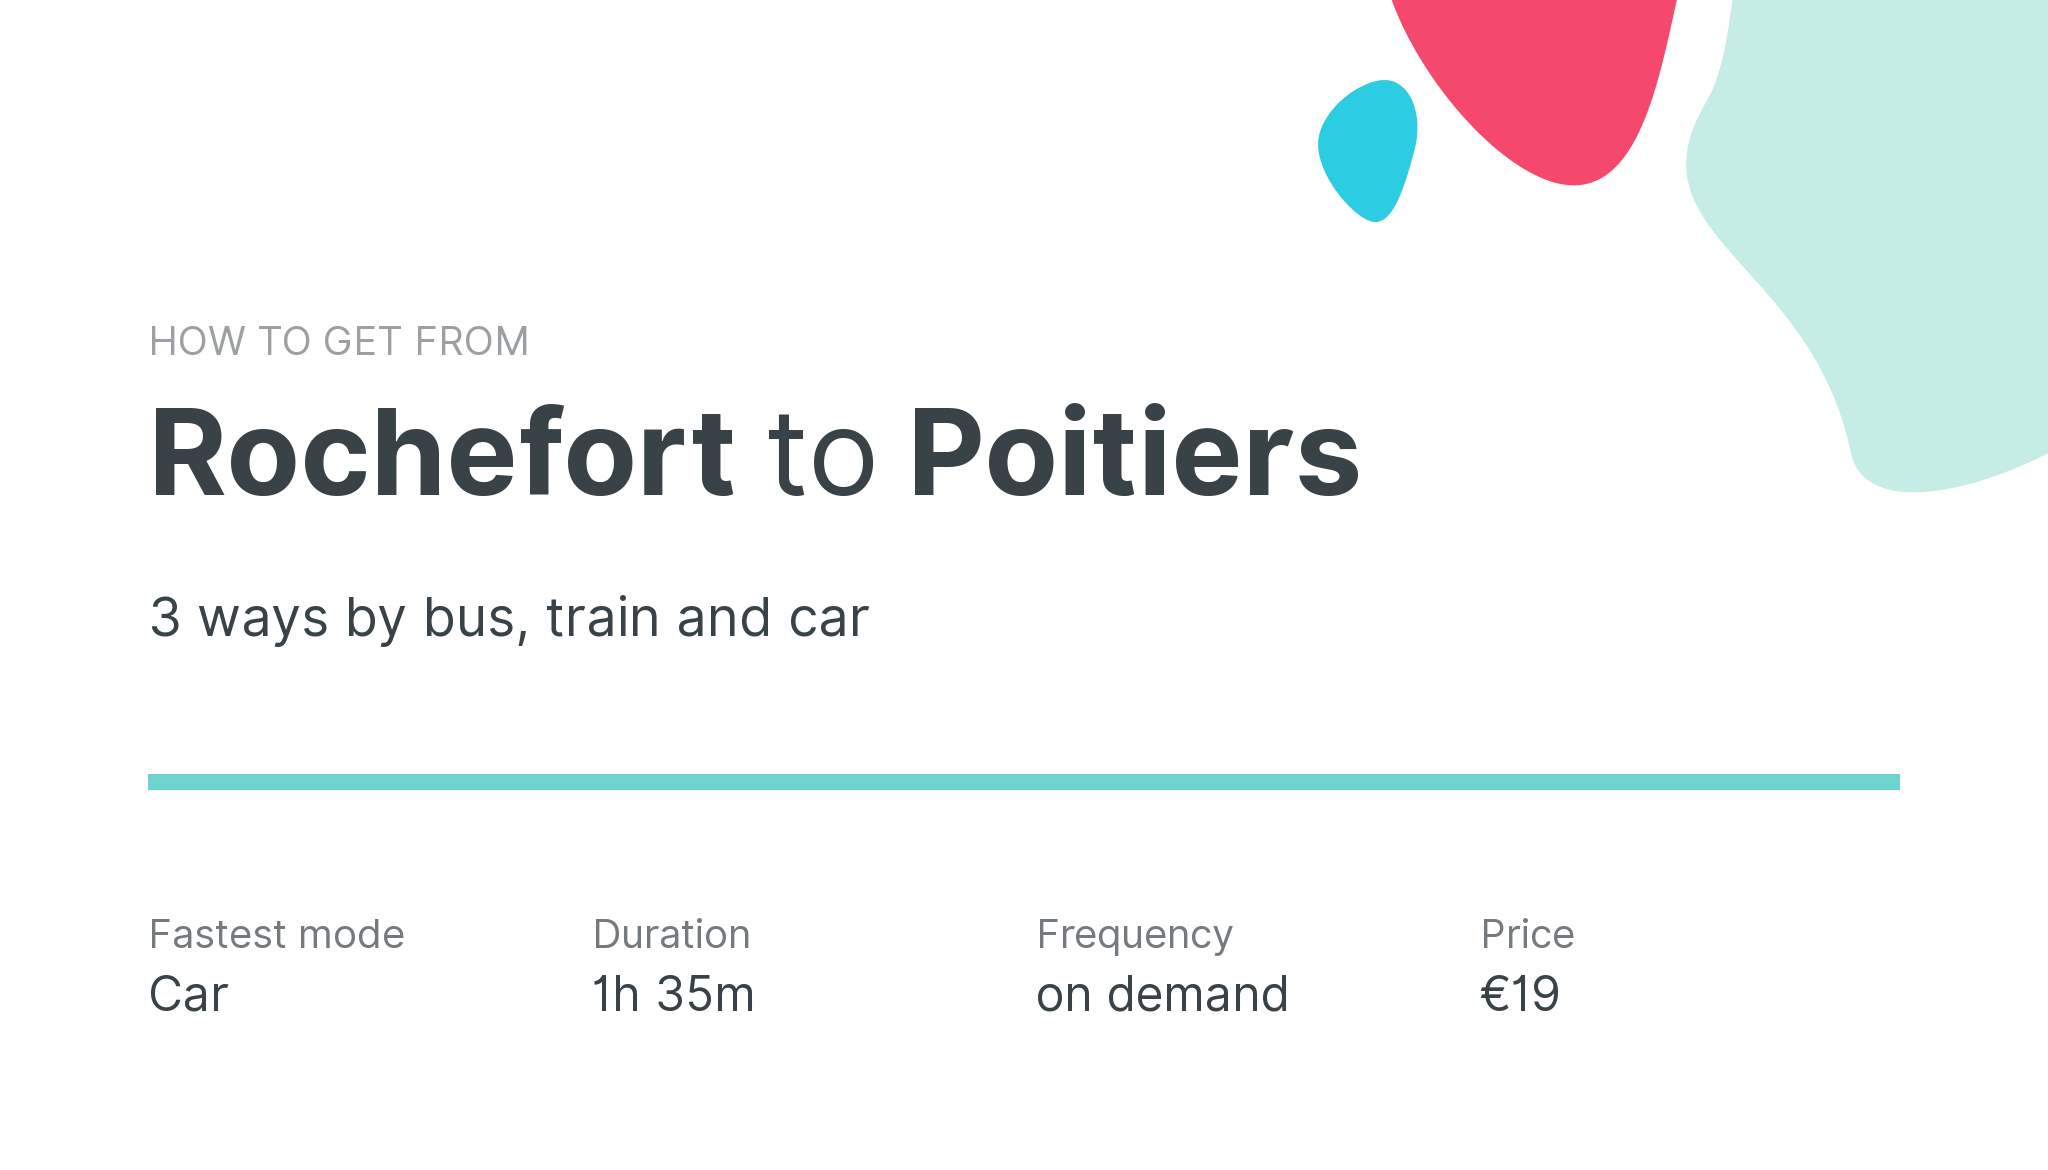 How do I get from Rochefort to Poitiers